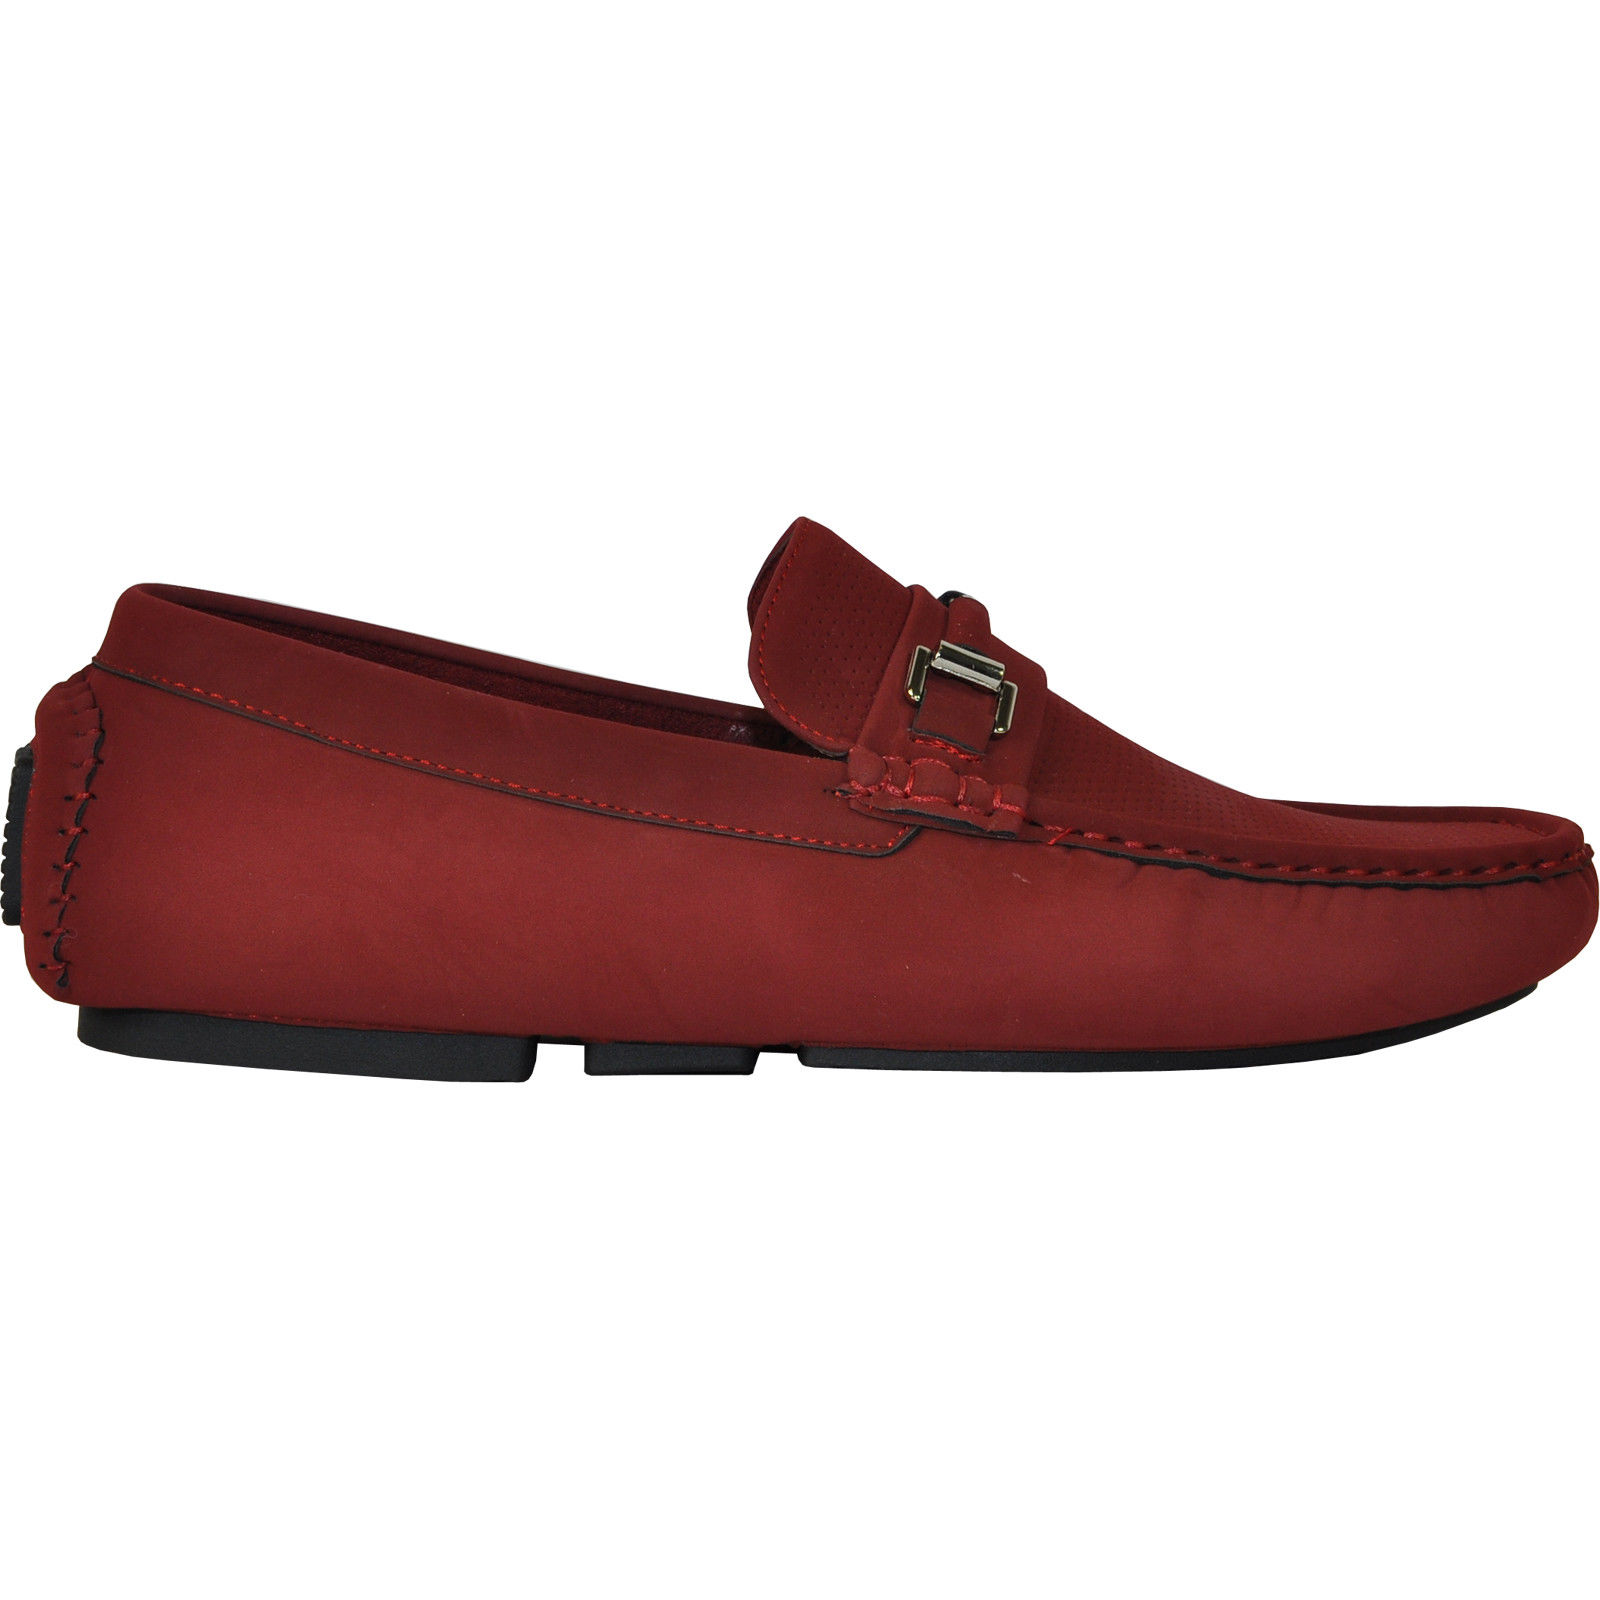 Bravo! Men Casual Shoe Todd-1 Driving Moccasin Red 10M US - image 4 of 7